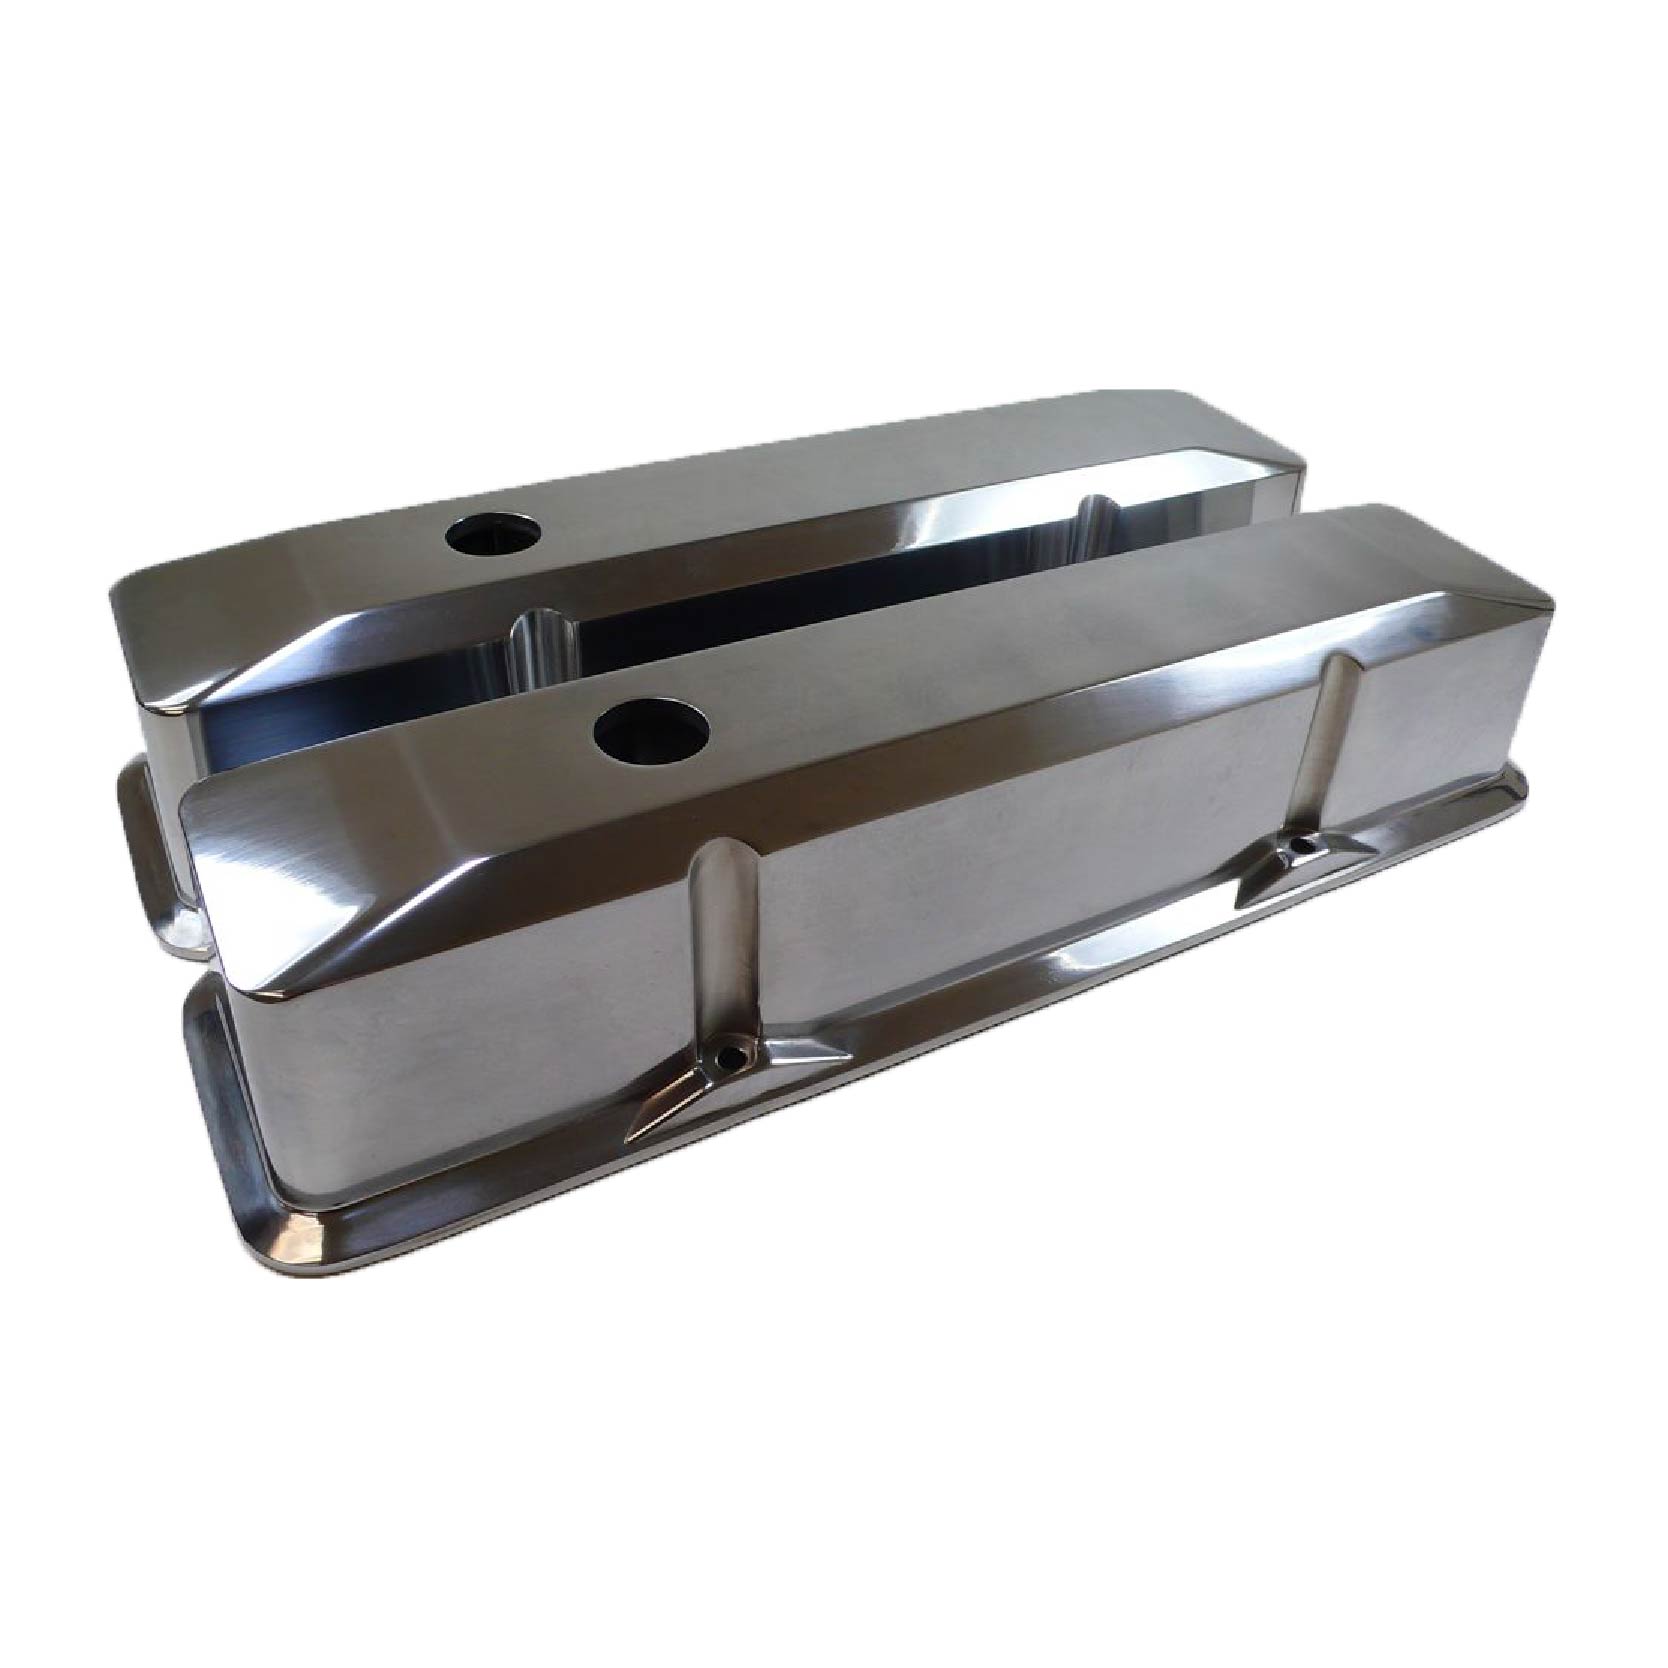 Racing Power Company R6152 Tall Recessed Plain Polished Aluminum Valve Cover for Small Block Chevy 